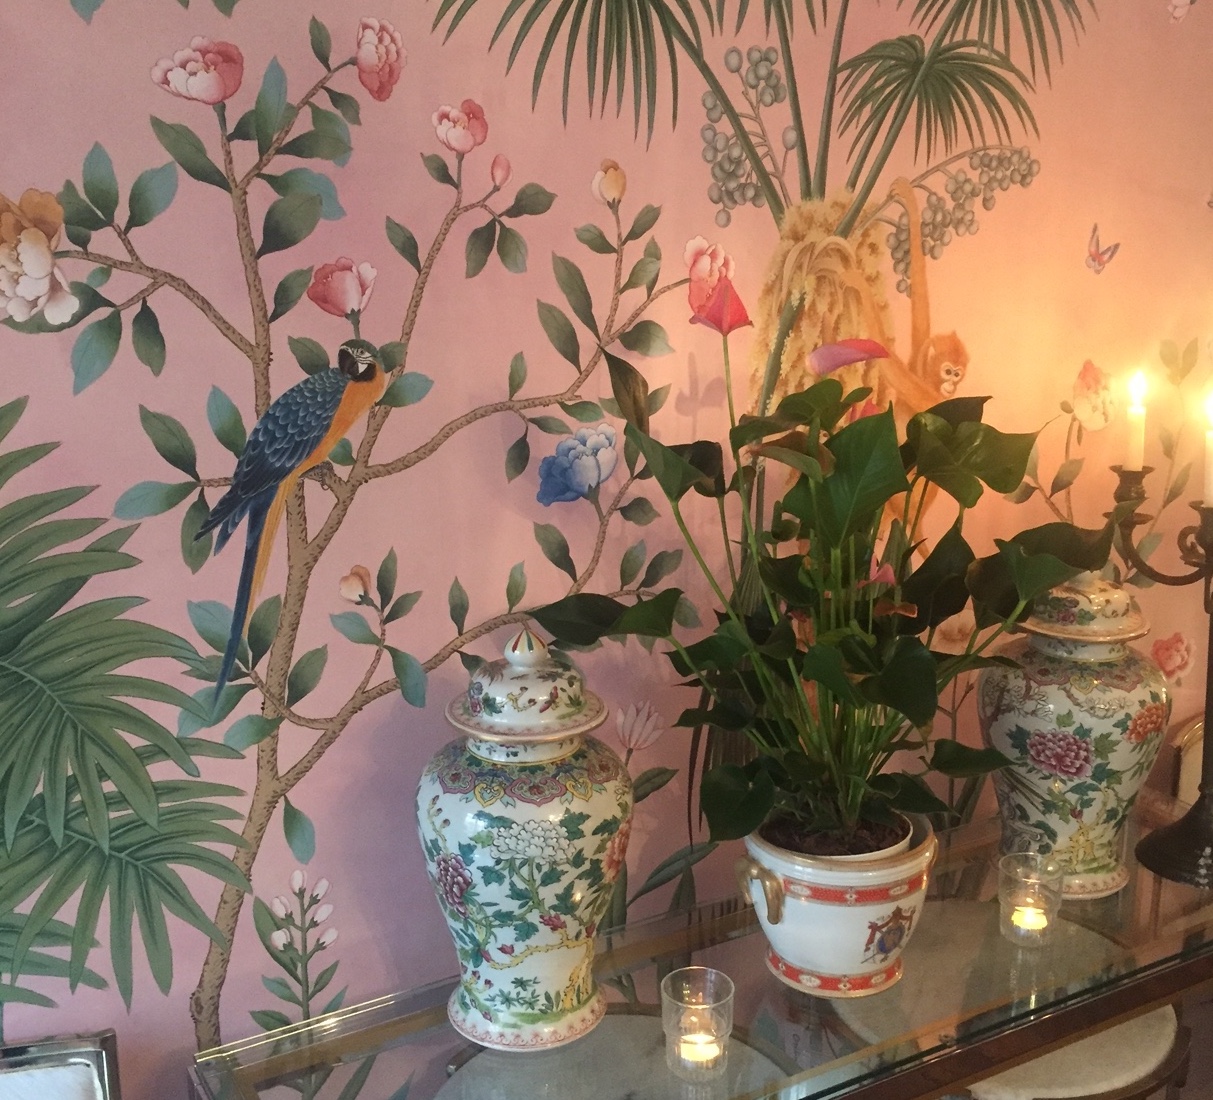 de Gournay Chinoiserie hand-painted perfection